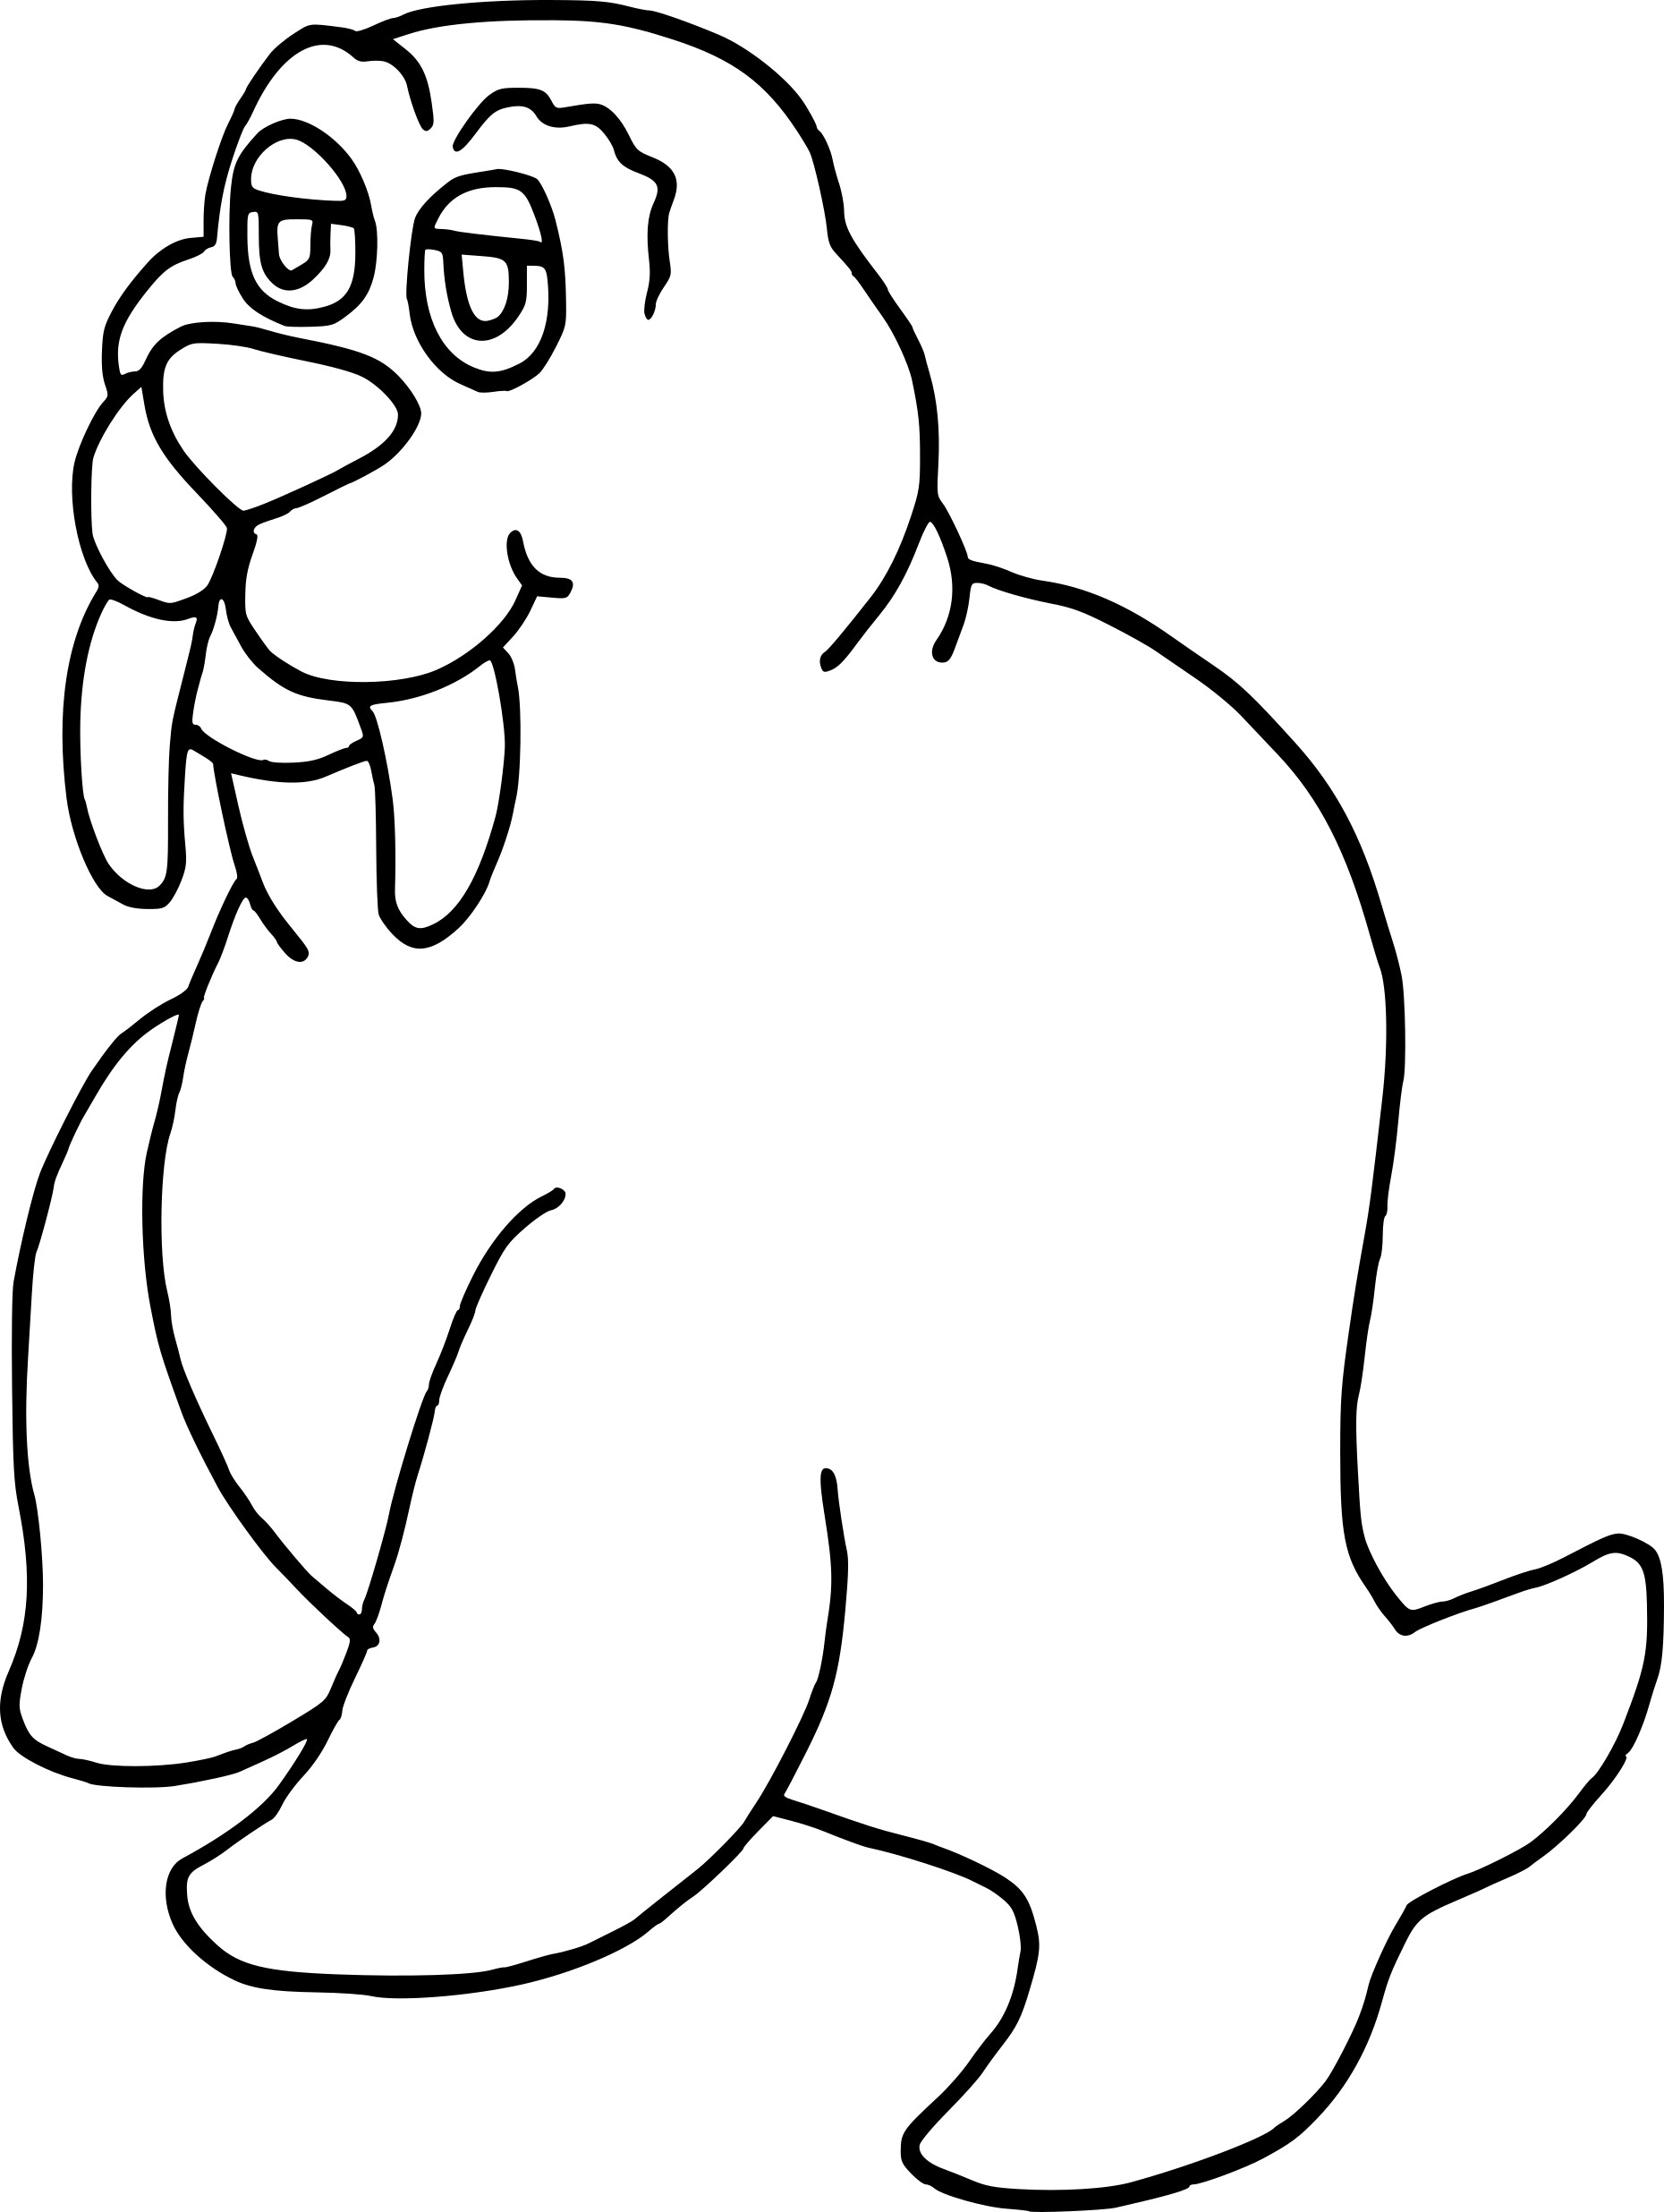 Walrus coloring page